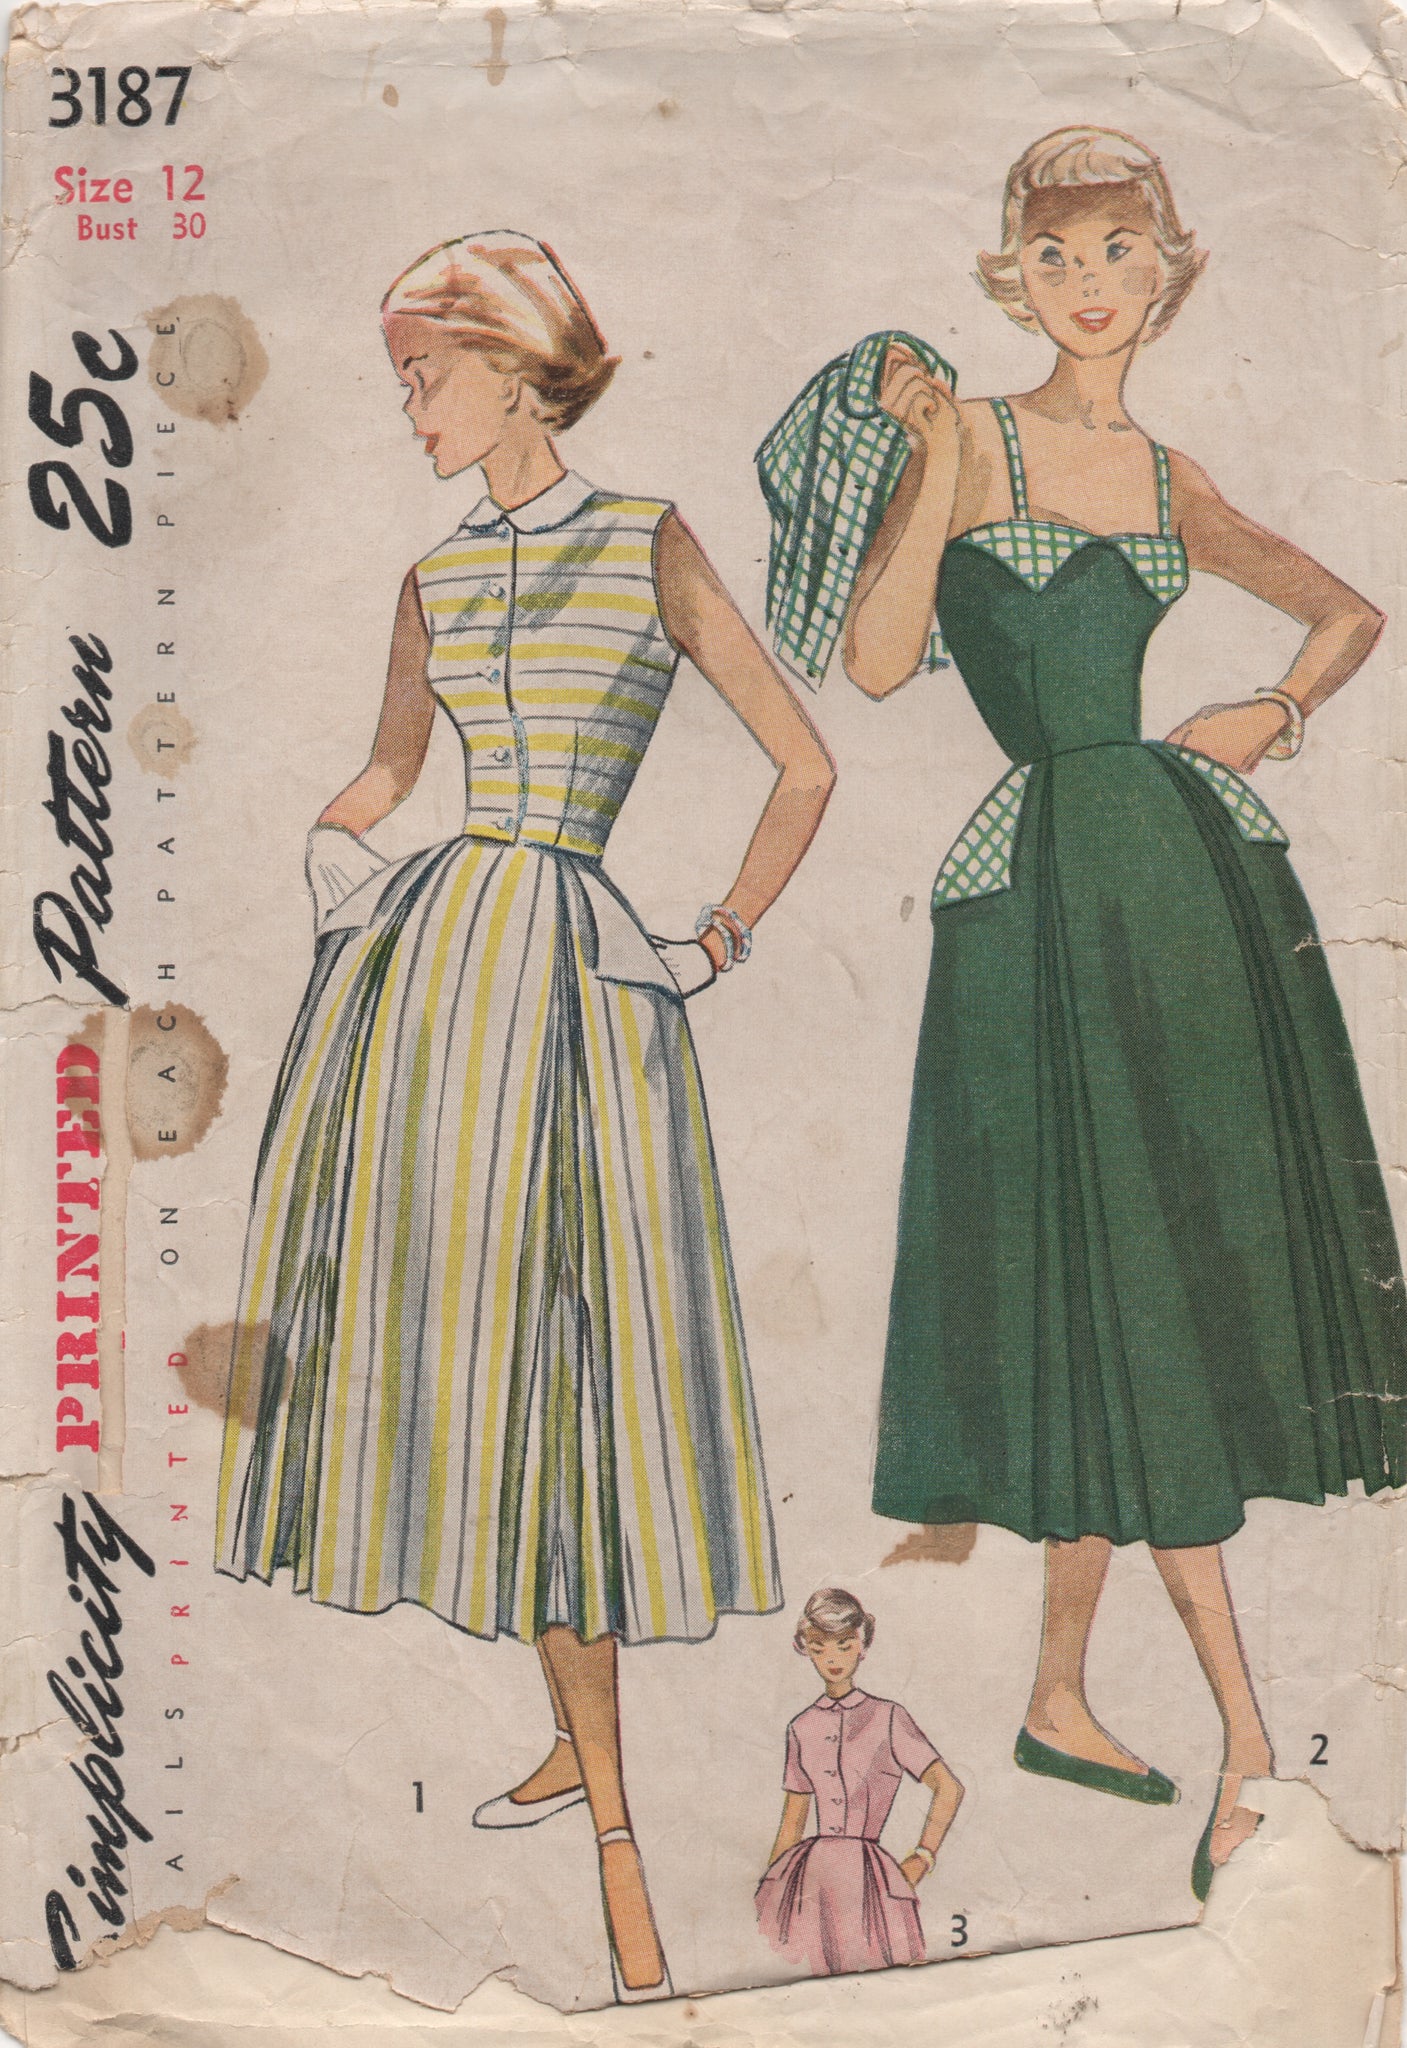 Amazon.com: Simplicity Misses' Vintage 1950's One Piece Dresses and Jacket  Sewing Pattern Kit, Design Code S9819, Sizes 8-10-12-14-16, Multicolor :  Arts, Crafts & Sewing